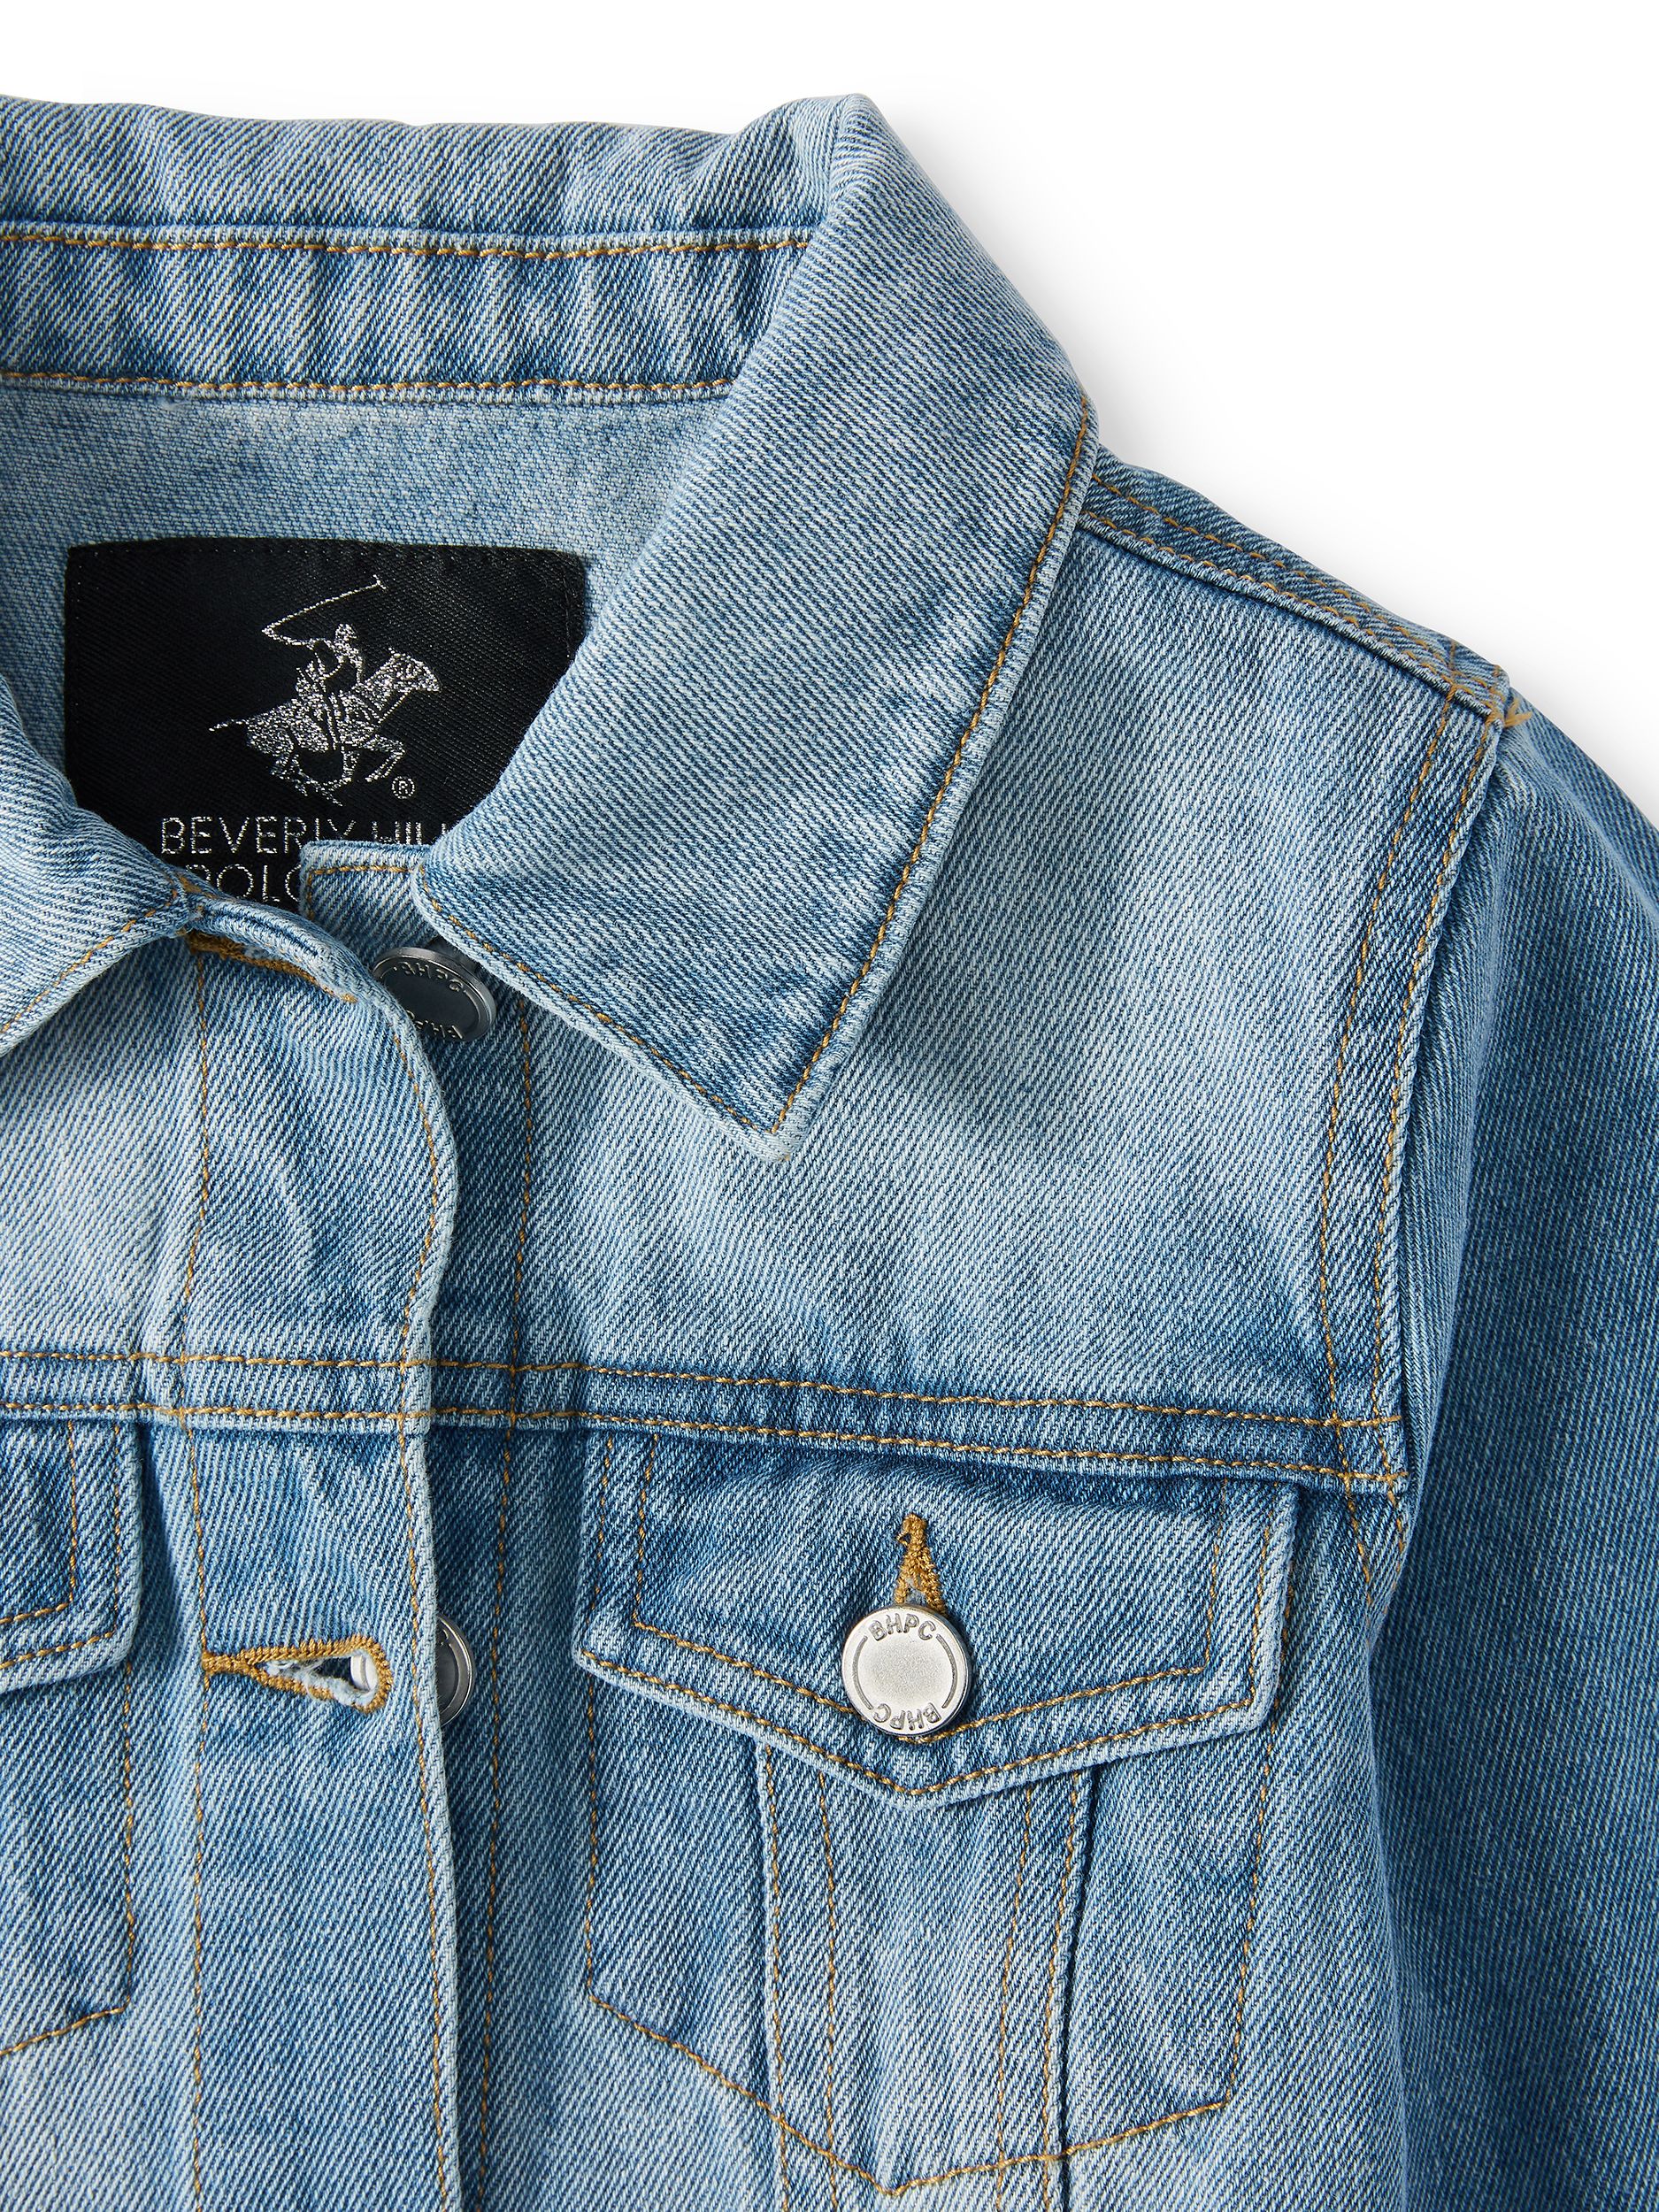 Beverly Hills Polo Club Girls 4-16 Denim Jean Jacket with Pockets - image 3 of 3